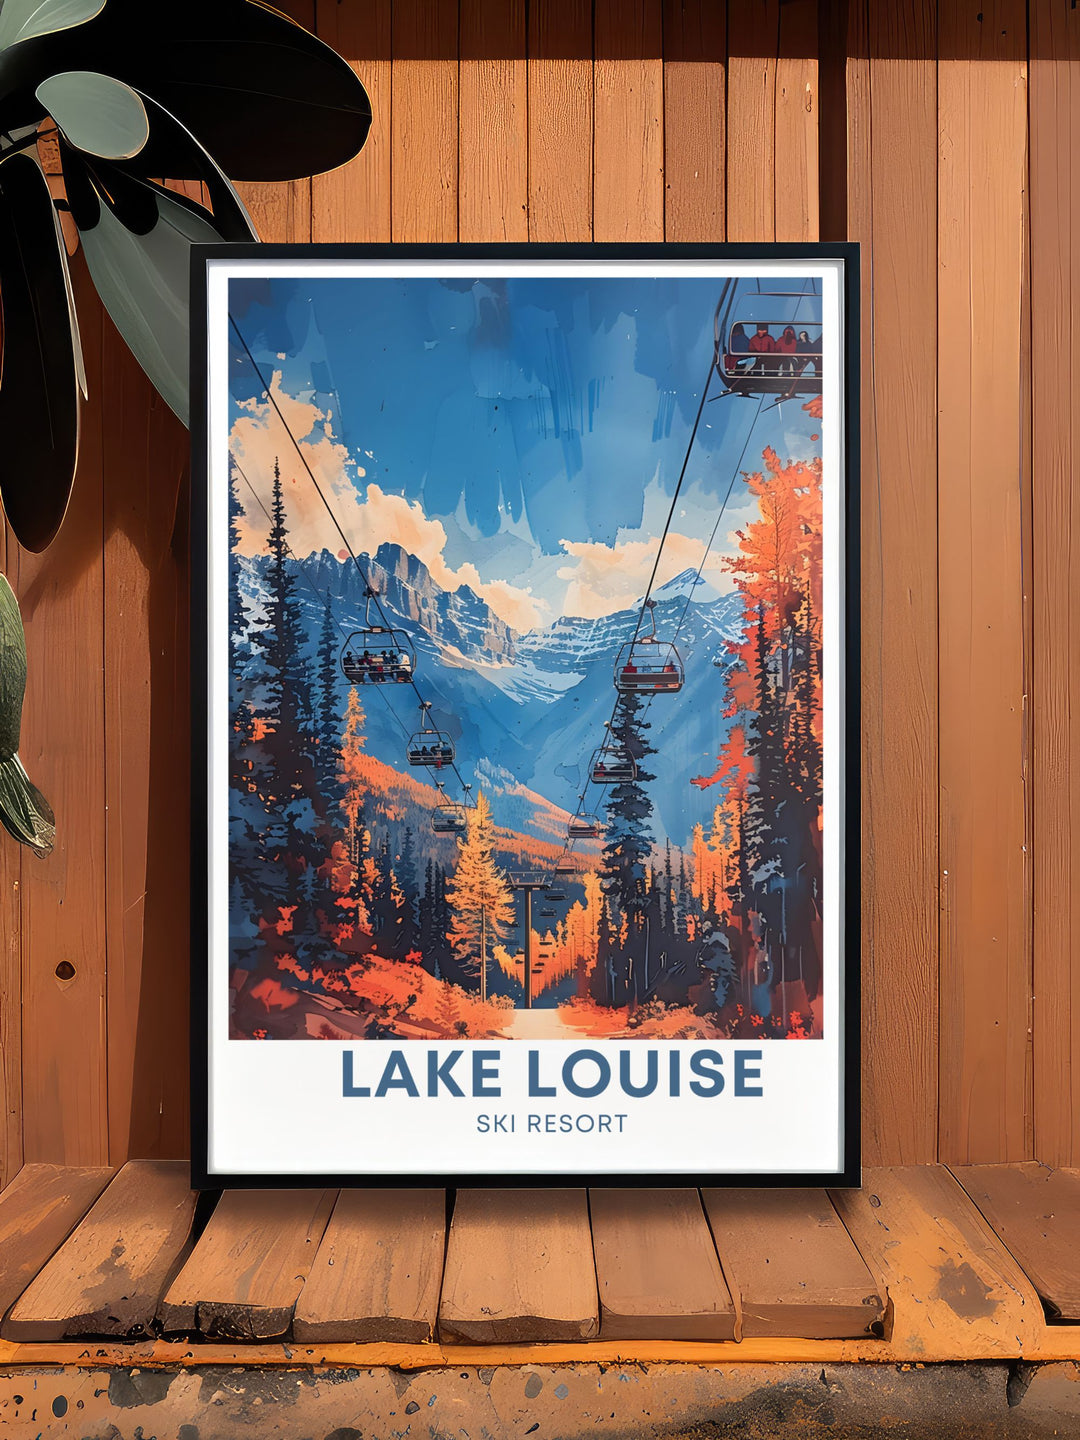 Banff National Park, Canadas oldest national park, is highlighted in this travel poster featuring Lake Louise. The detailed illustration captures the parks rich history, diverse wildlife, and dramatic landscapes, perfect for any nature inspired collection.